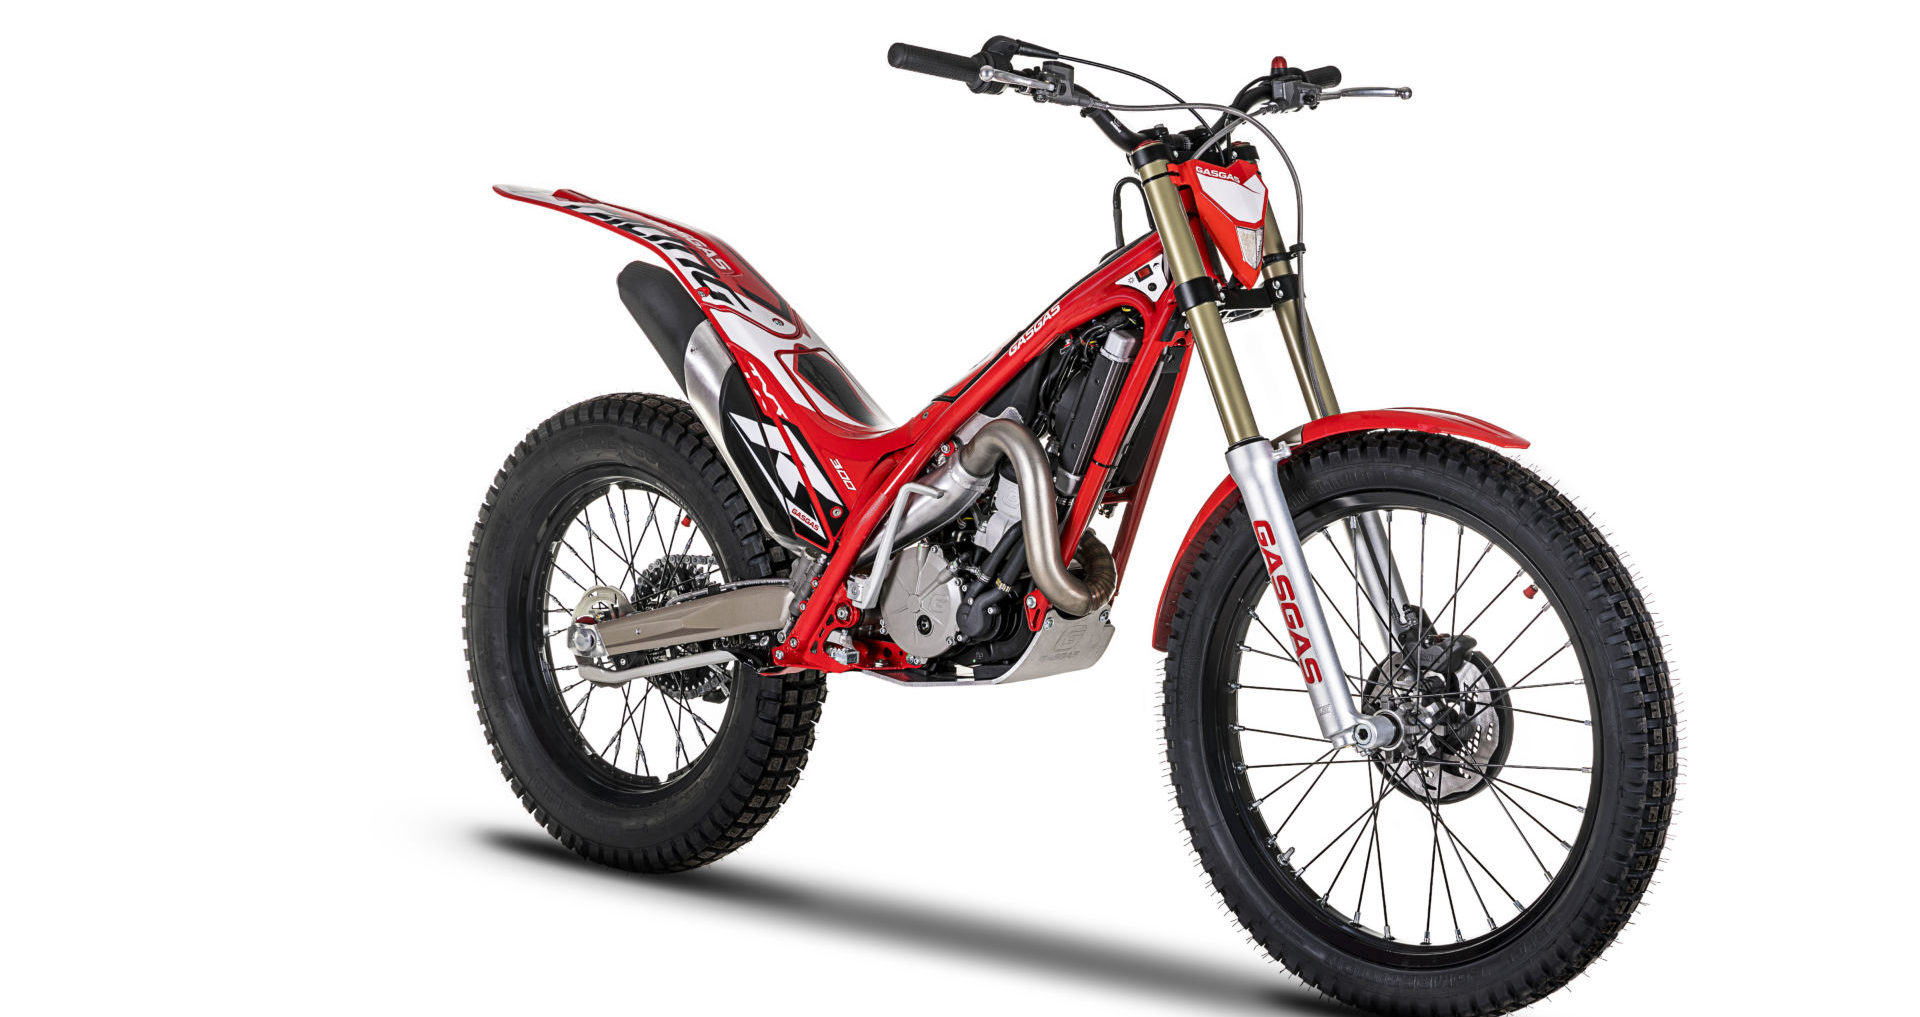 Gasgas Motorcycles New 2020 Models Available Now Roadracing